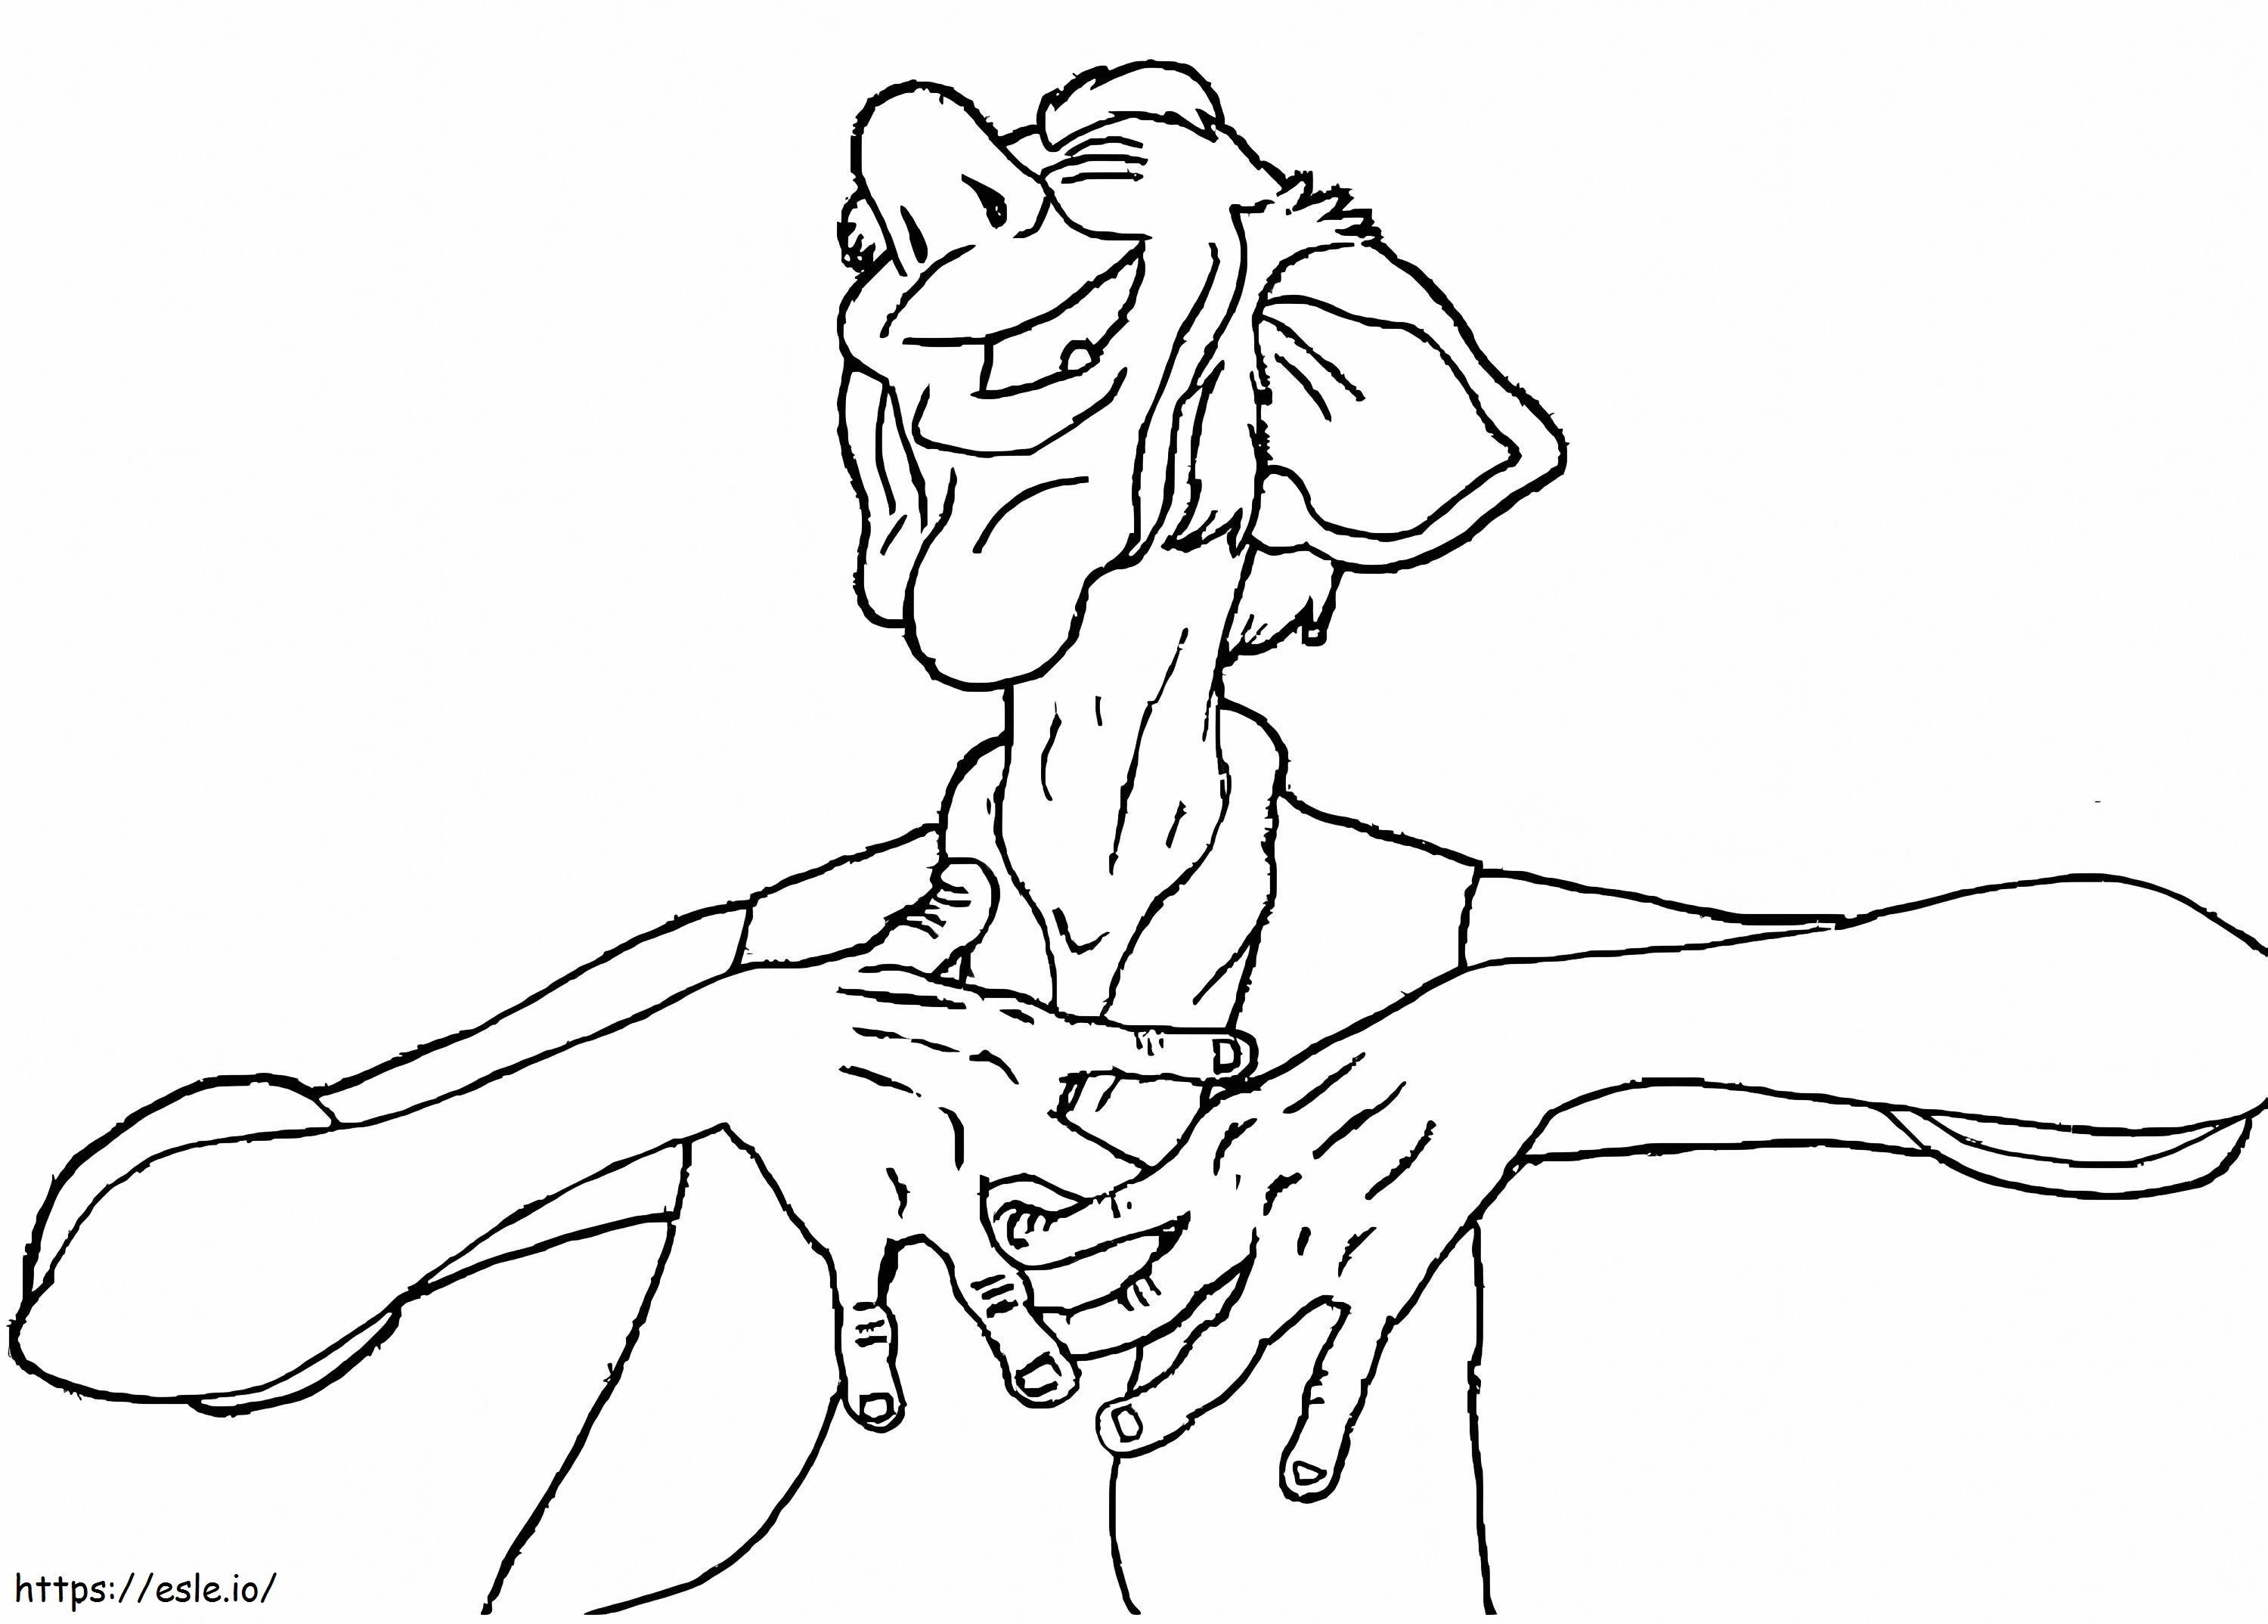 Happy Giant Bfg coloring page